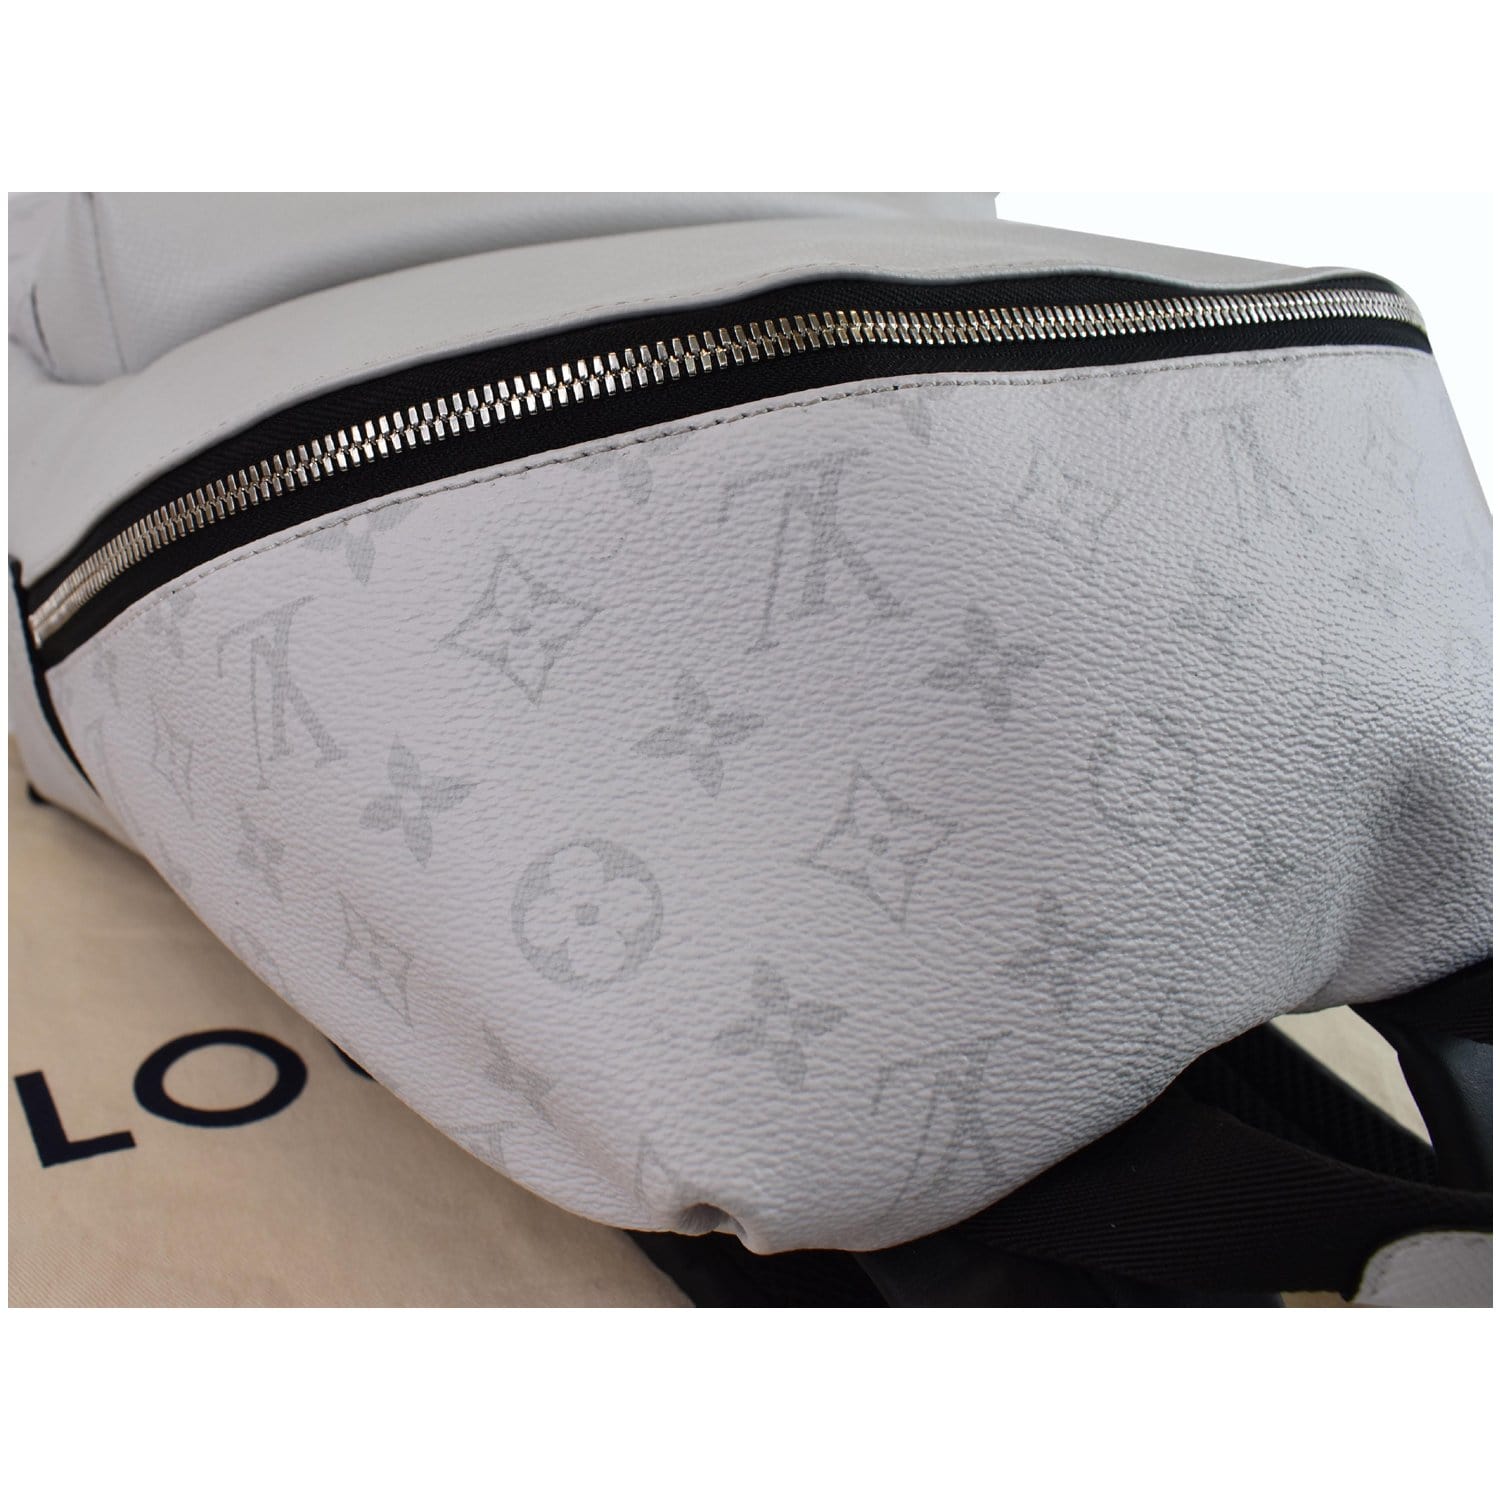 Shop Louis Vuitton Discovery Discovery Backpack Pm (DISCOVERY PM